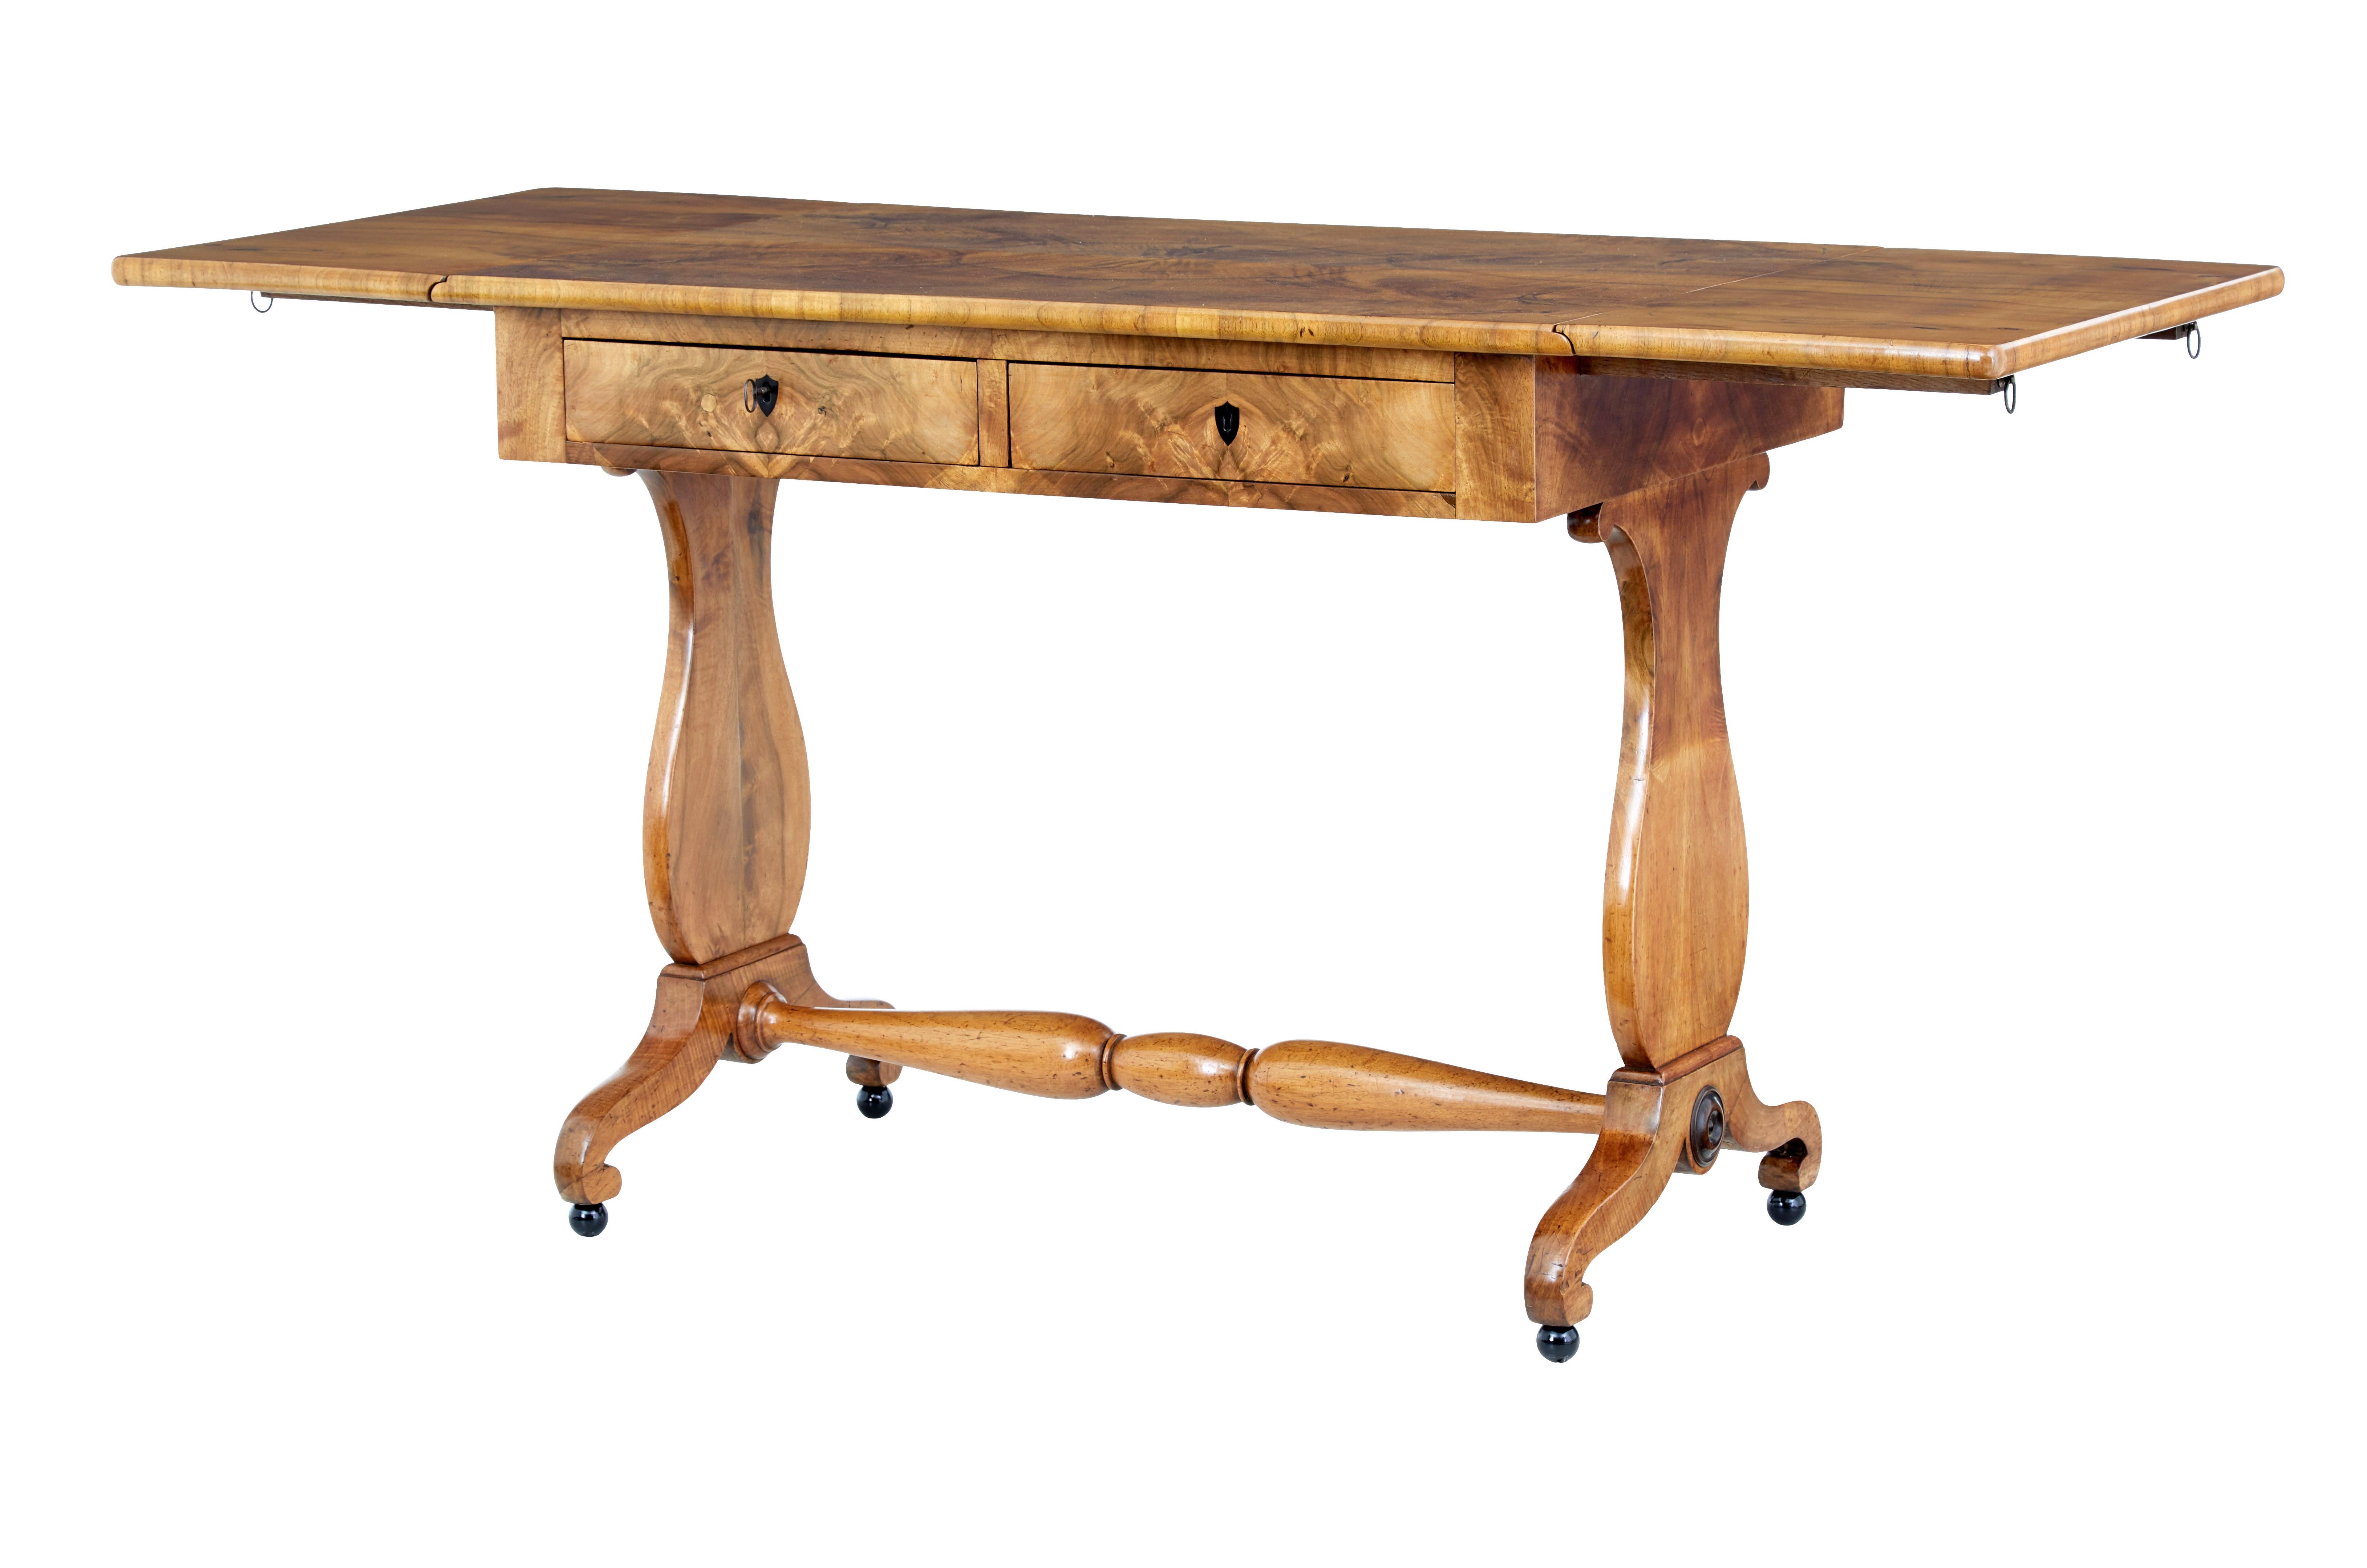 Swedish 1870s Empire Revival birch wood sofa table with drop leaves, butterfly veneer and carved legs. Bask in the elegance of the Empire Revival era with this gorgeous Swedish 19th century Empire Revival sofa Table, circa 1870. Masterfully crafted,